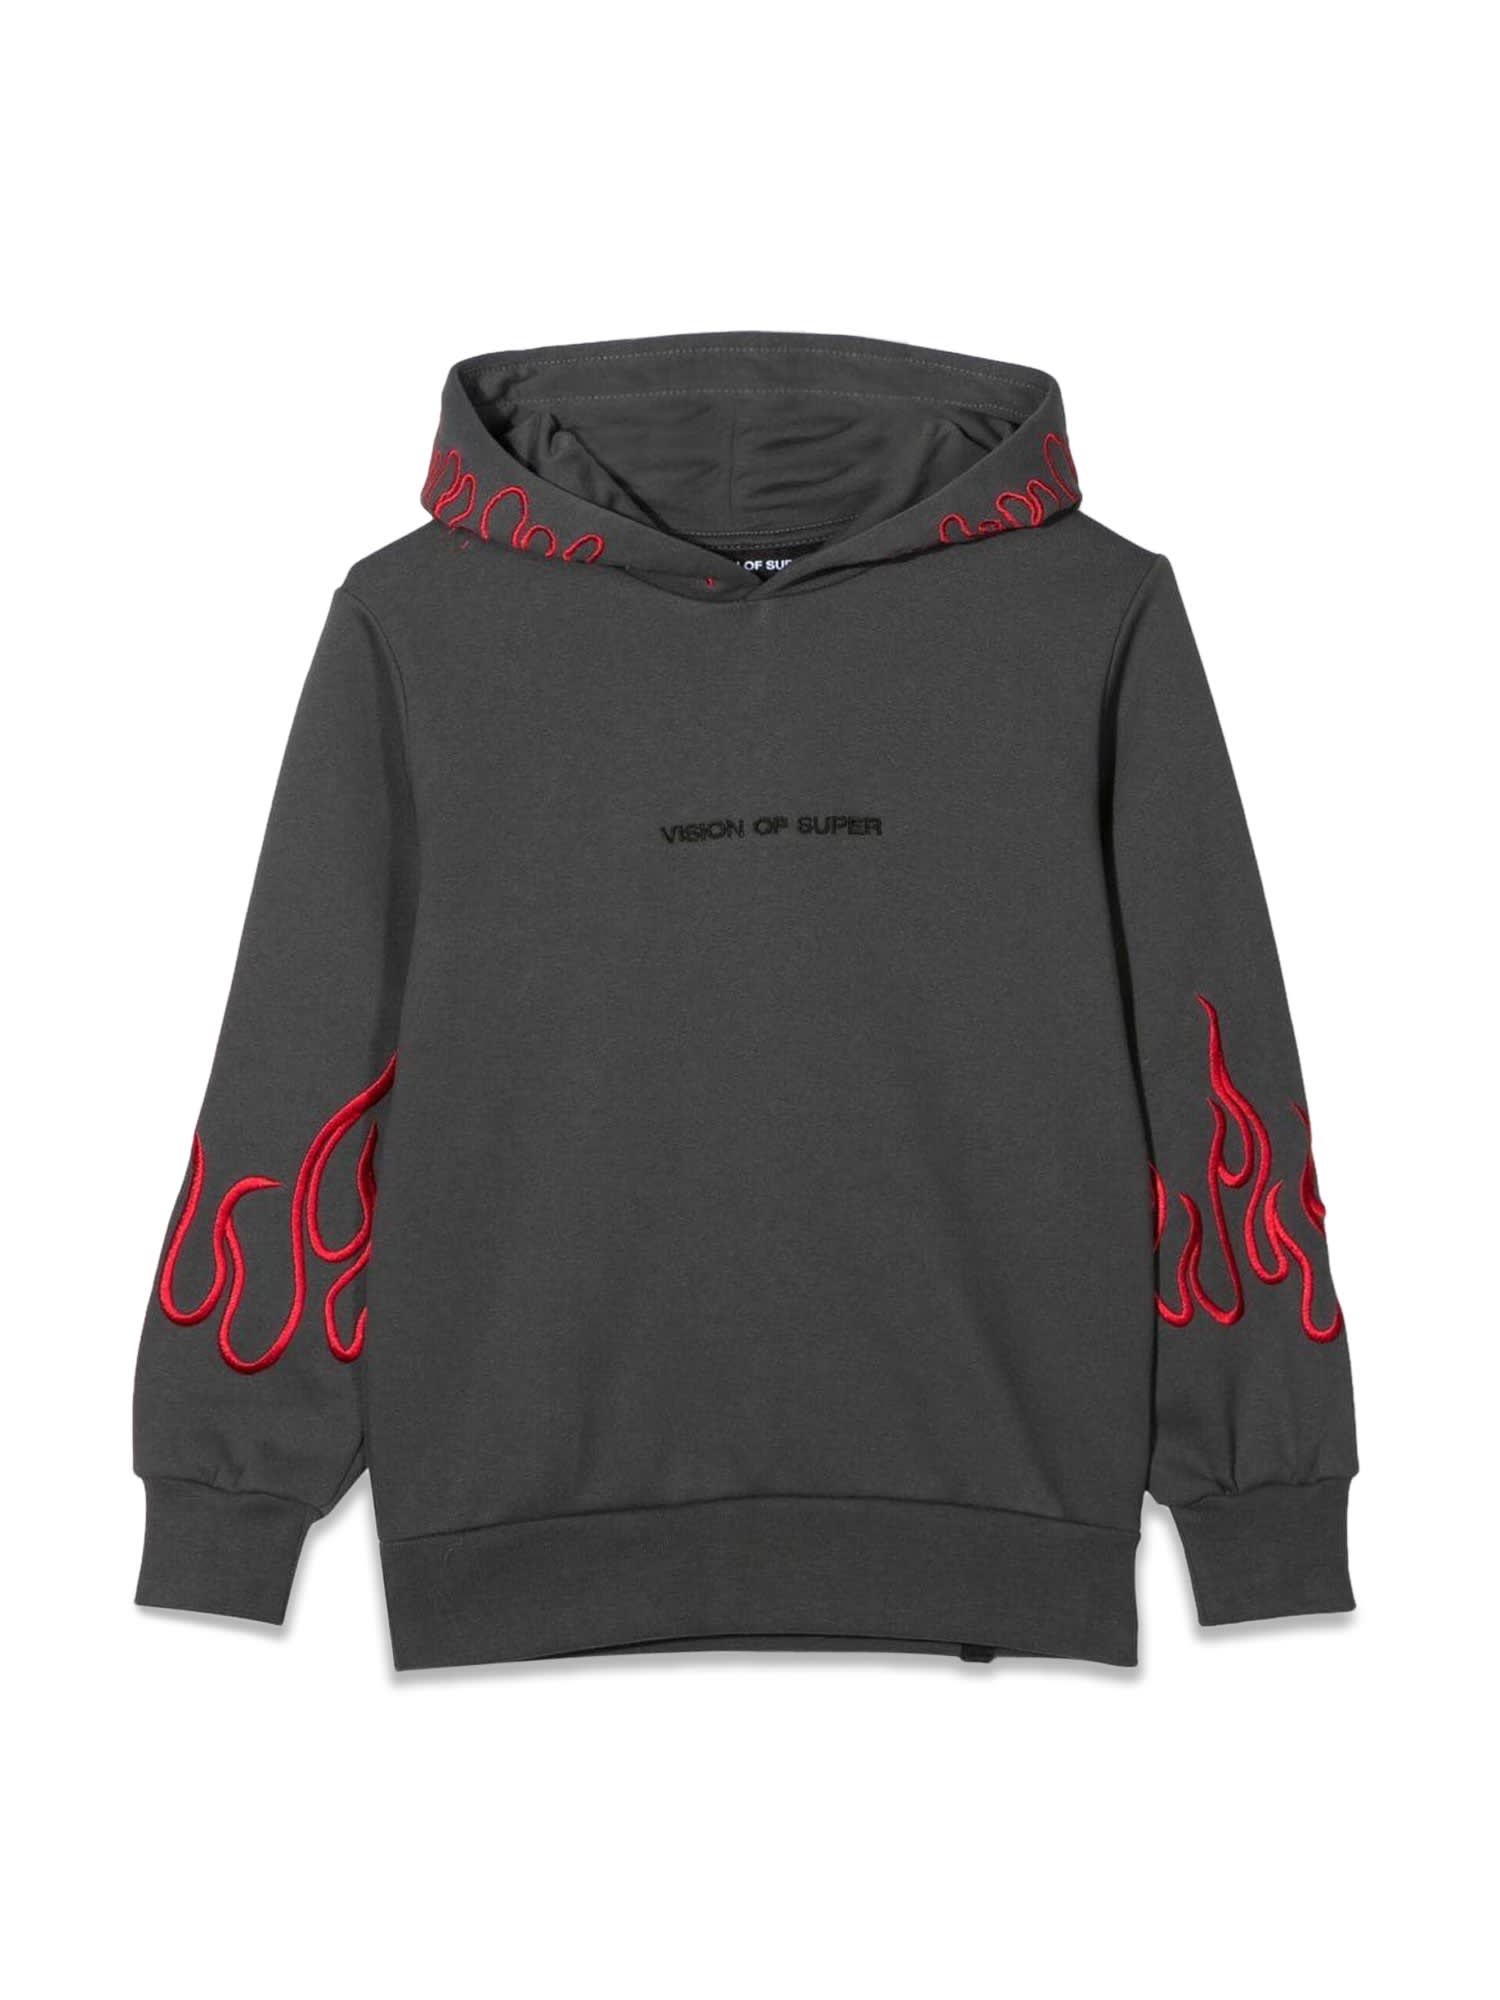 Vision of Super Embroidered Red Flames Hoodie